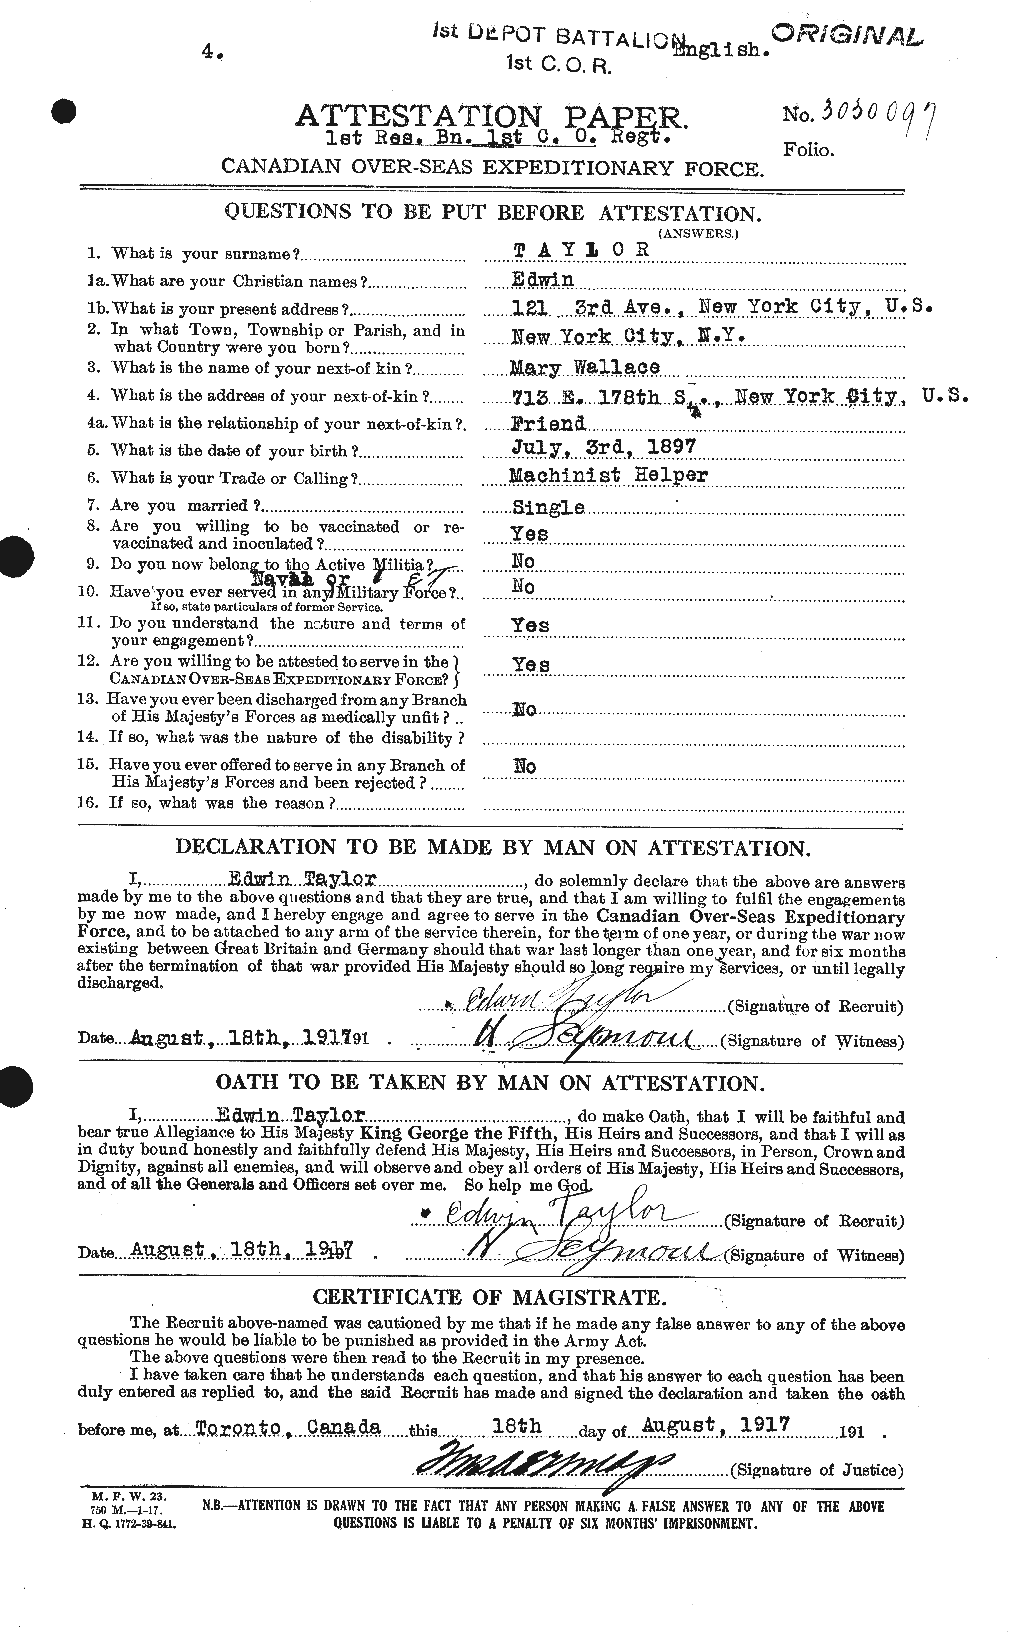 Personnel Records of the First World War - CEF 627337a